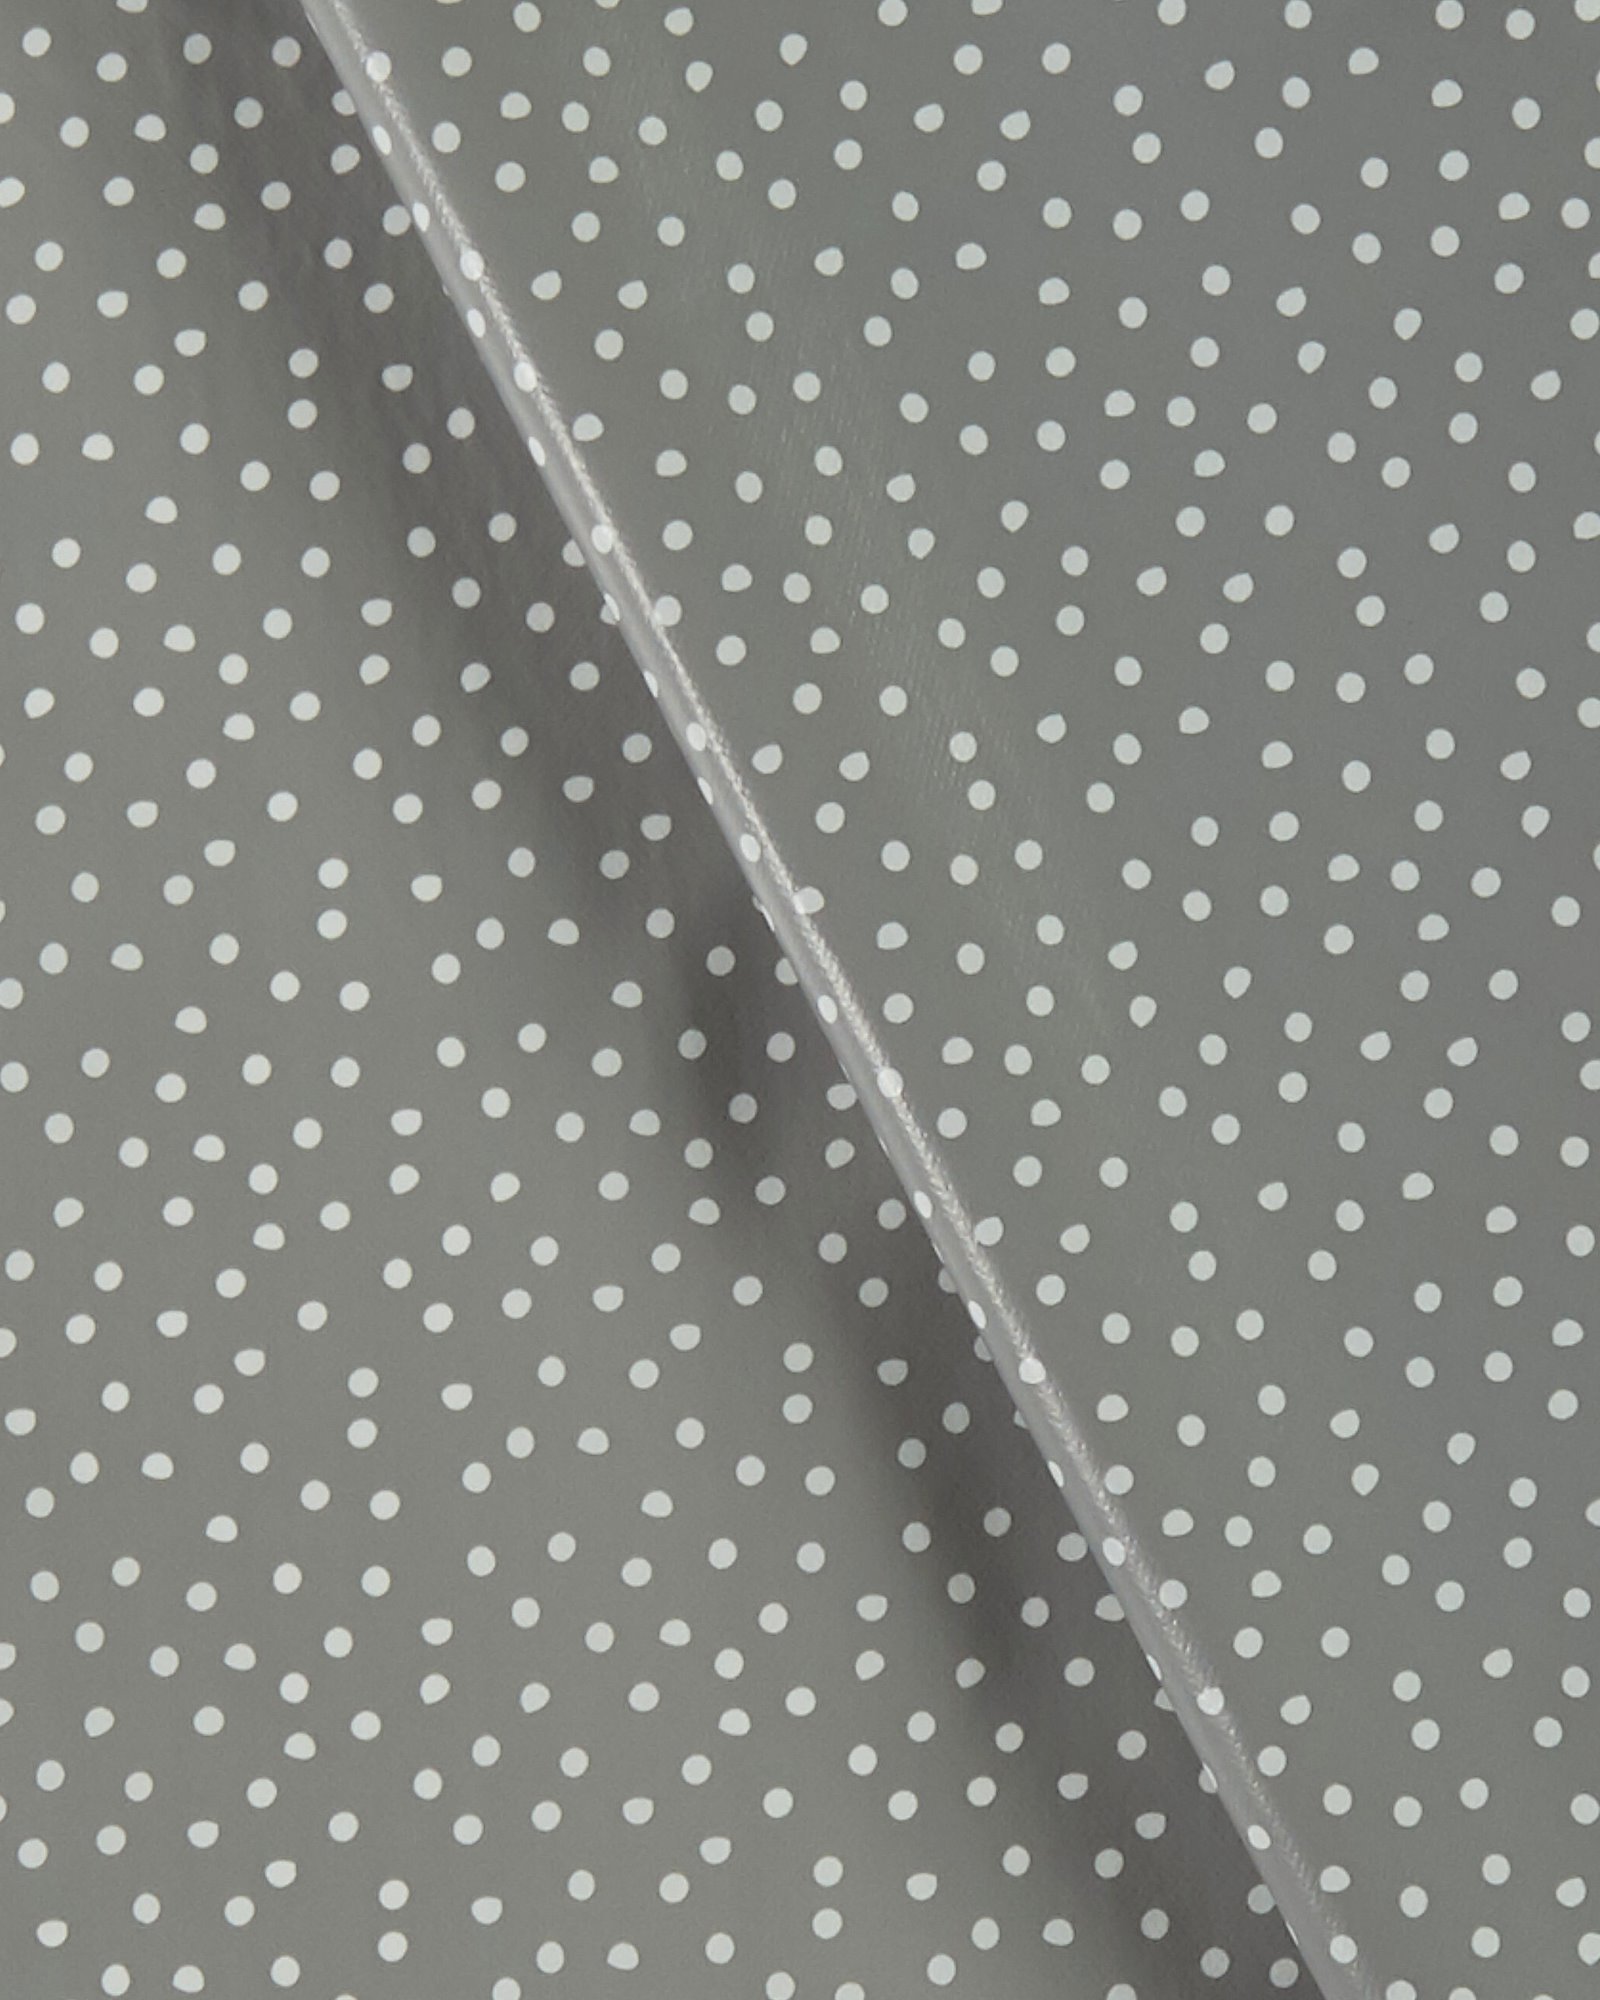 Non-woven oilcloth lt grey w white dots 866151_pack